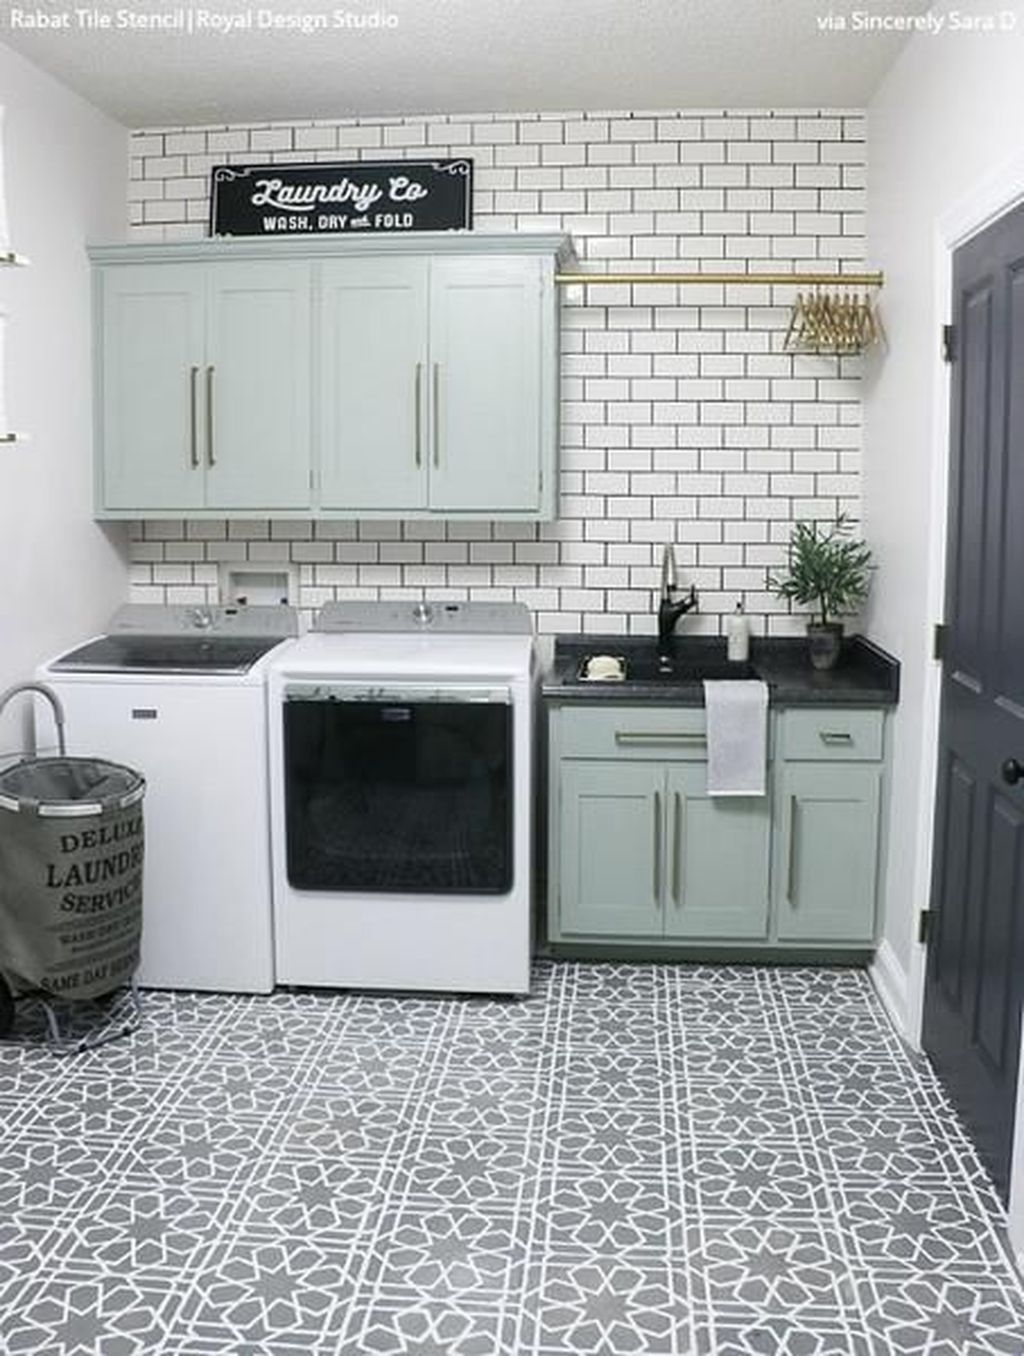 Inspiring Laundry Room Design With French Country Style 42